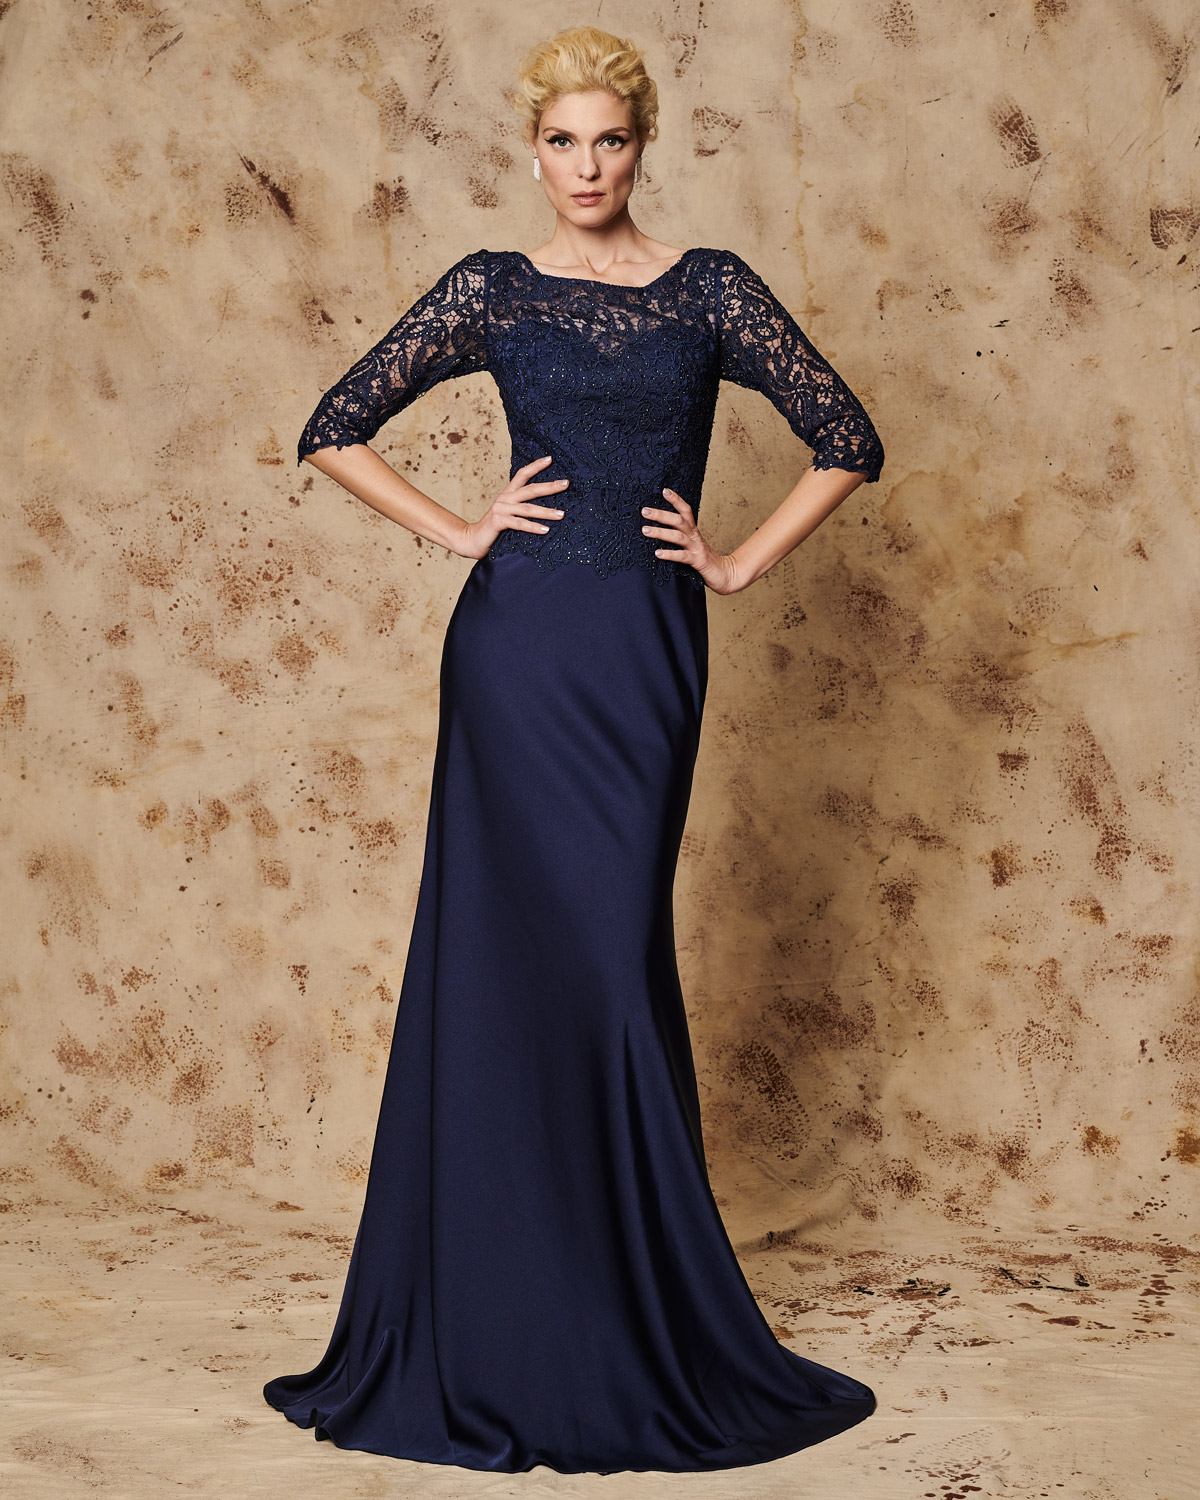 Classic Dresses / Long evening dress with lace bust and 3/4 sleeves